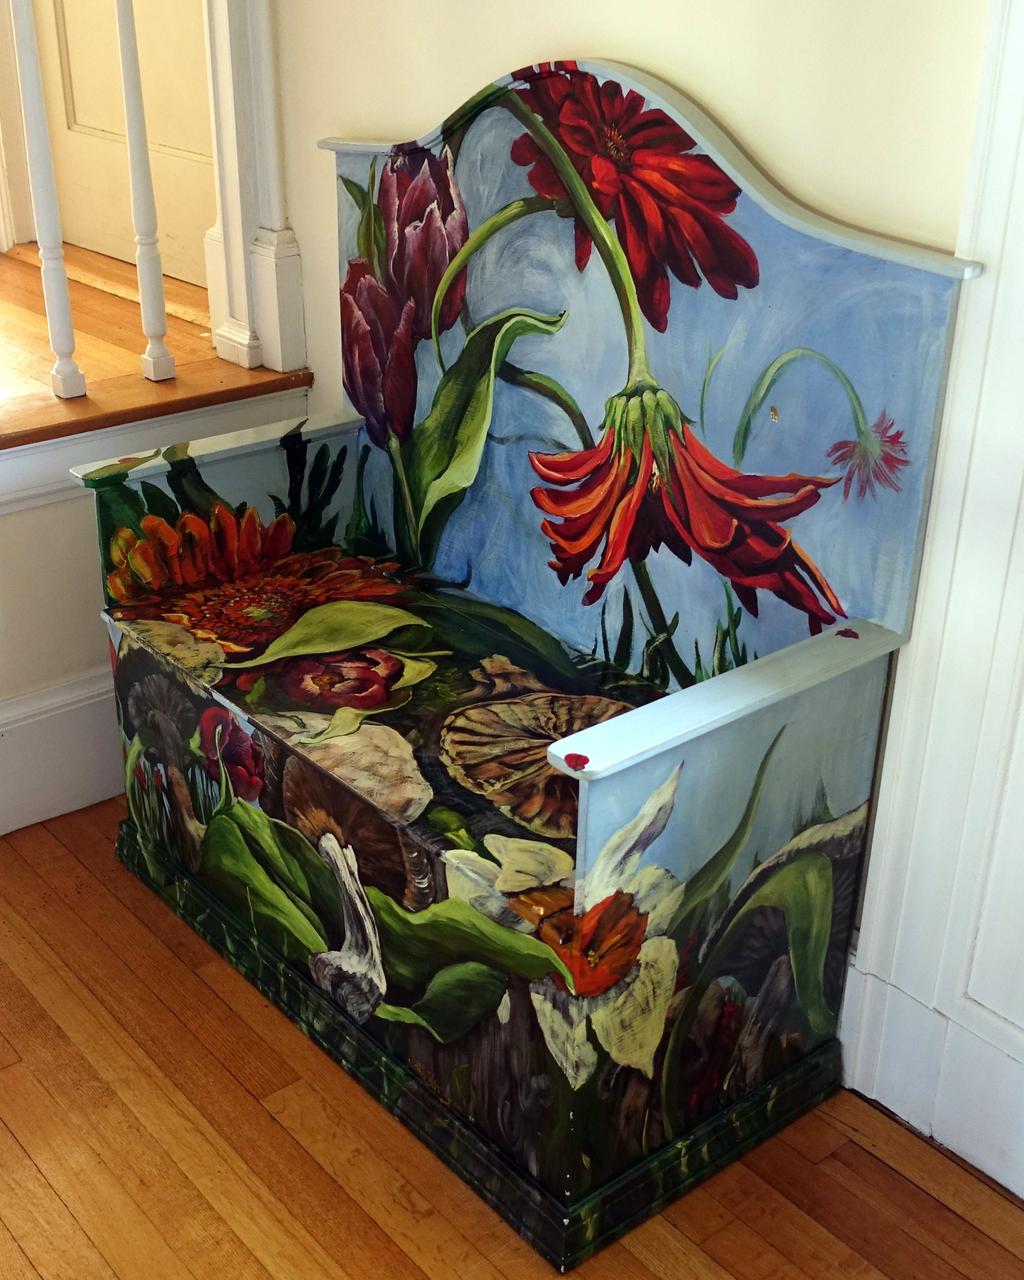 [Gayle Mangan](https://gmkfineart.com/) painted this toy chest that I designed and built